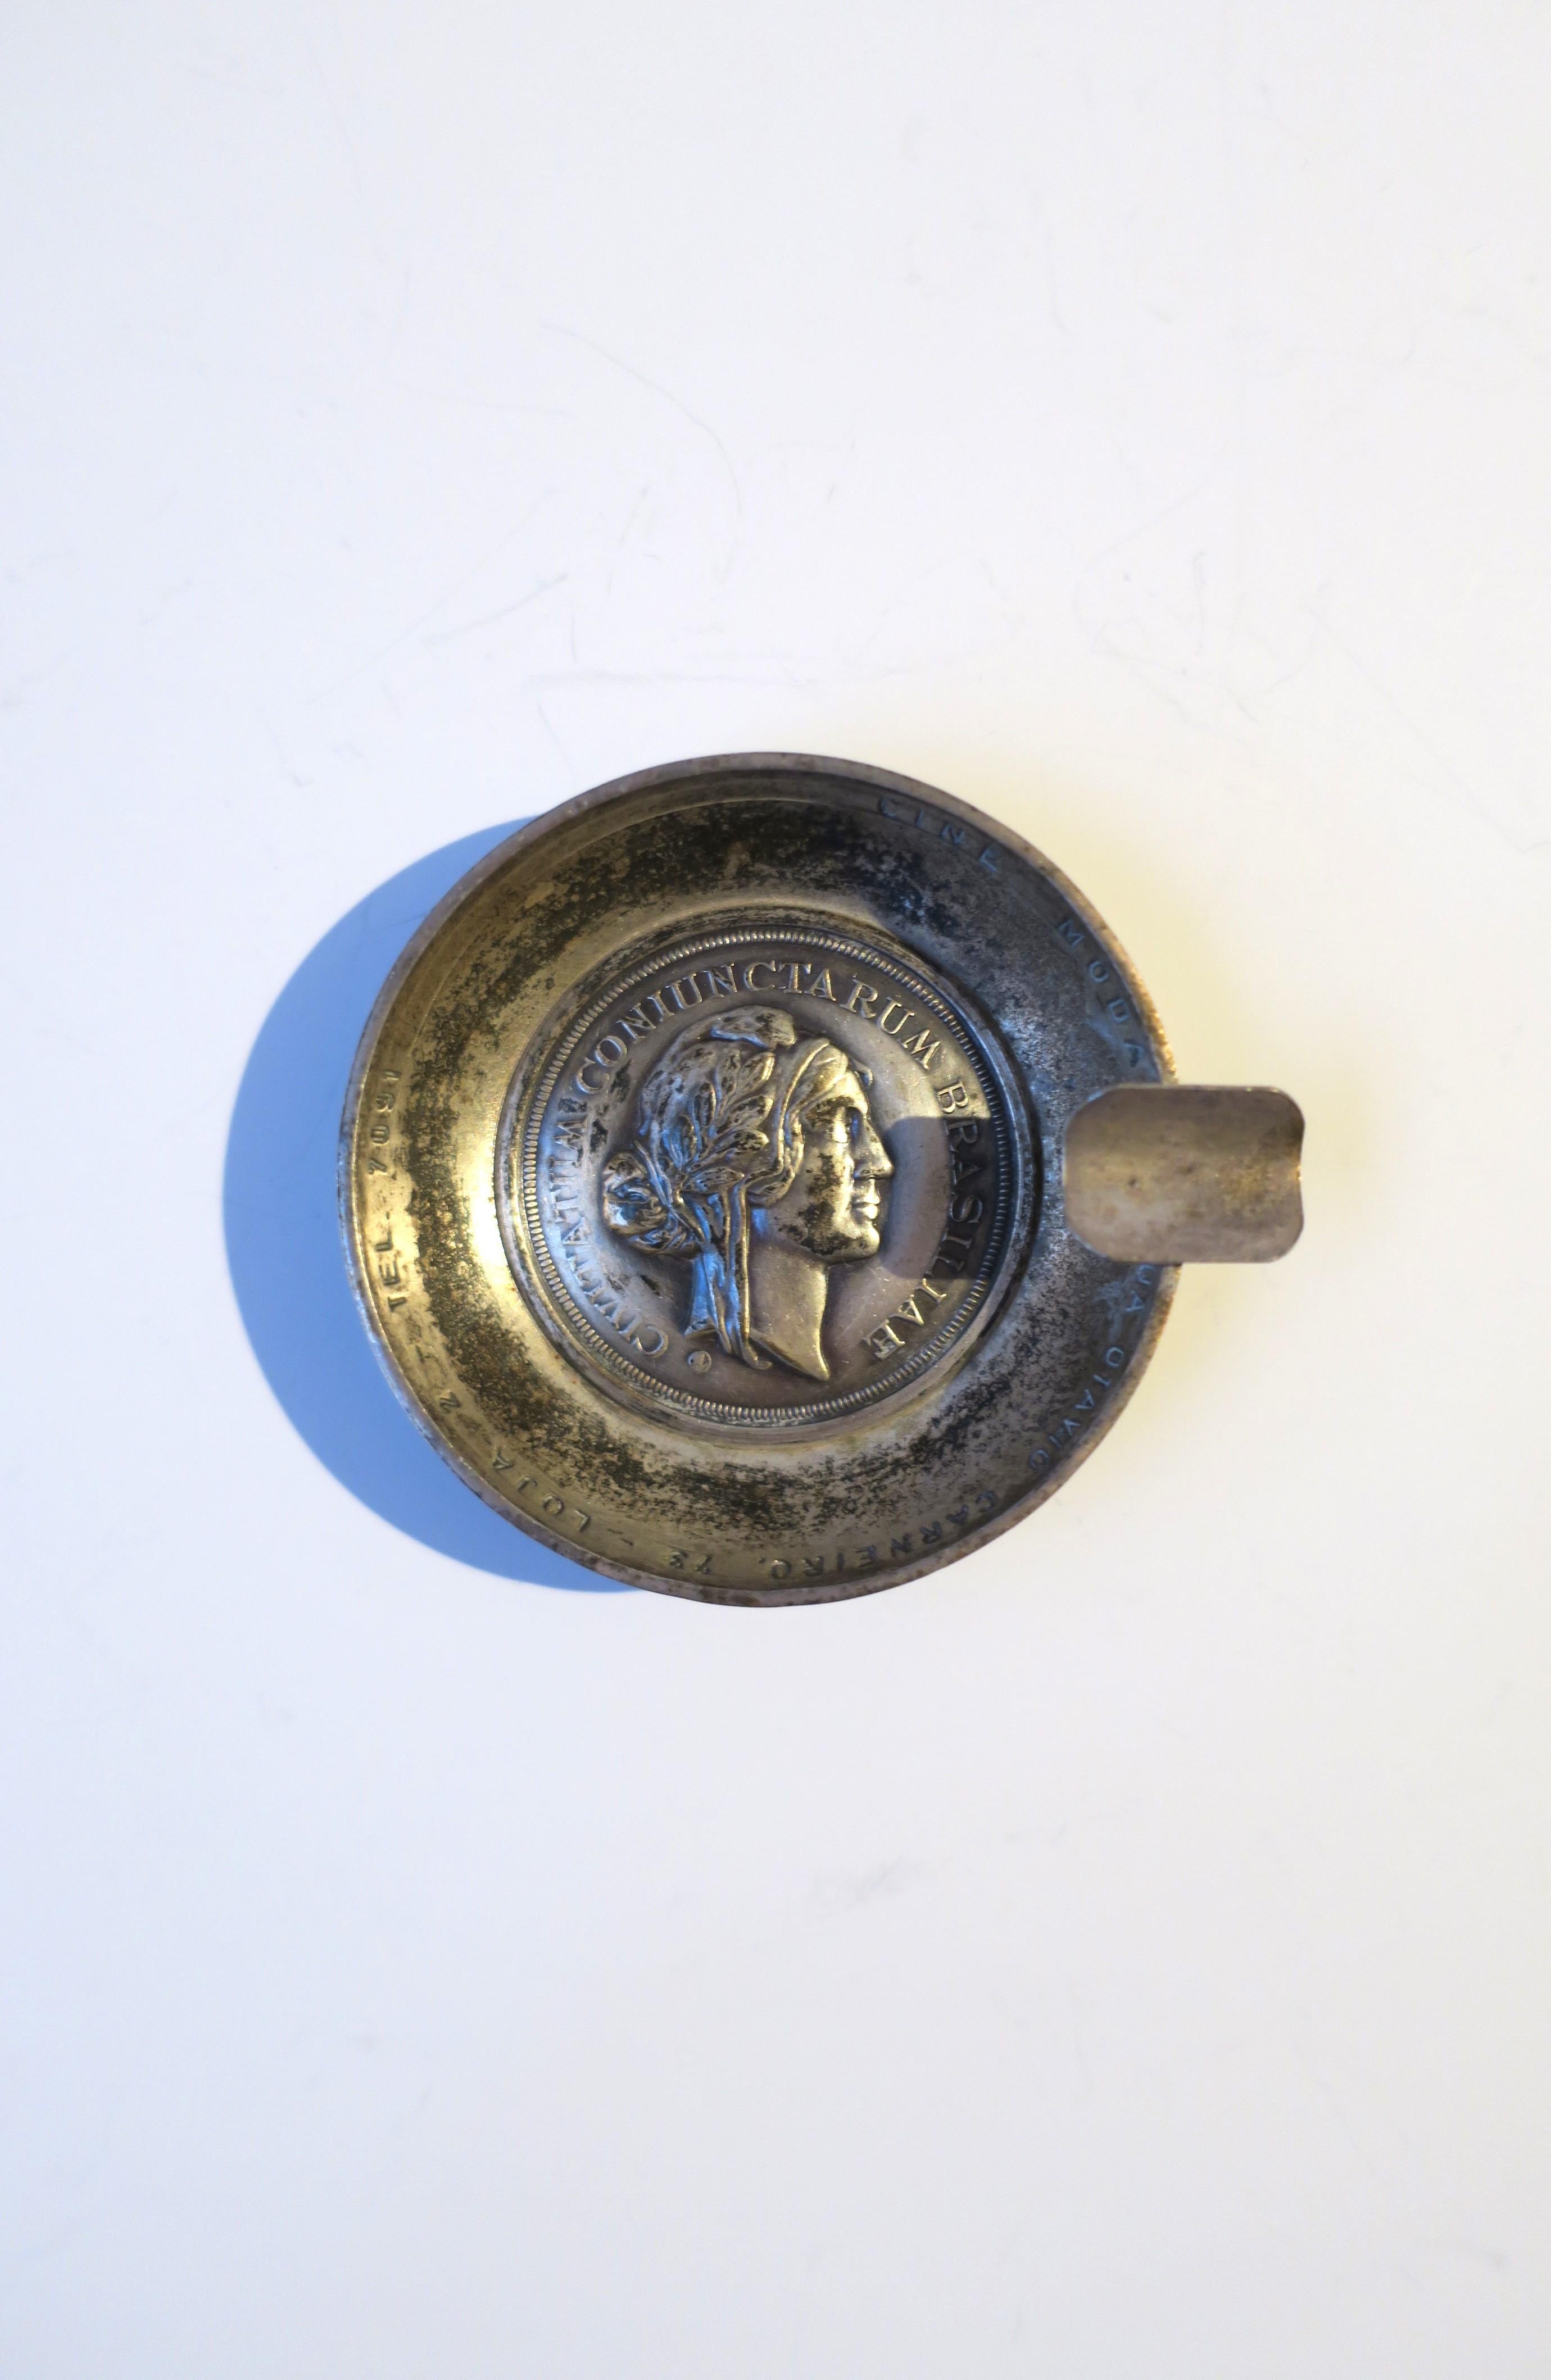 A silver plate and metal coin ashtray from Brazilian restaurant 'Cine Modas', circa mid-20th century, Brazil. Restaurant information is embossed around top inside rim, center coin is a female head bust representative of Brazilian rum company